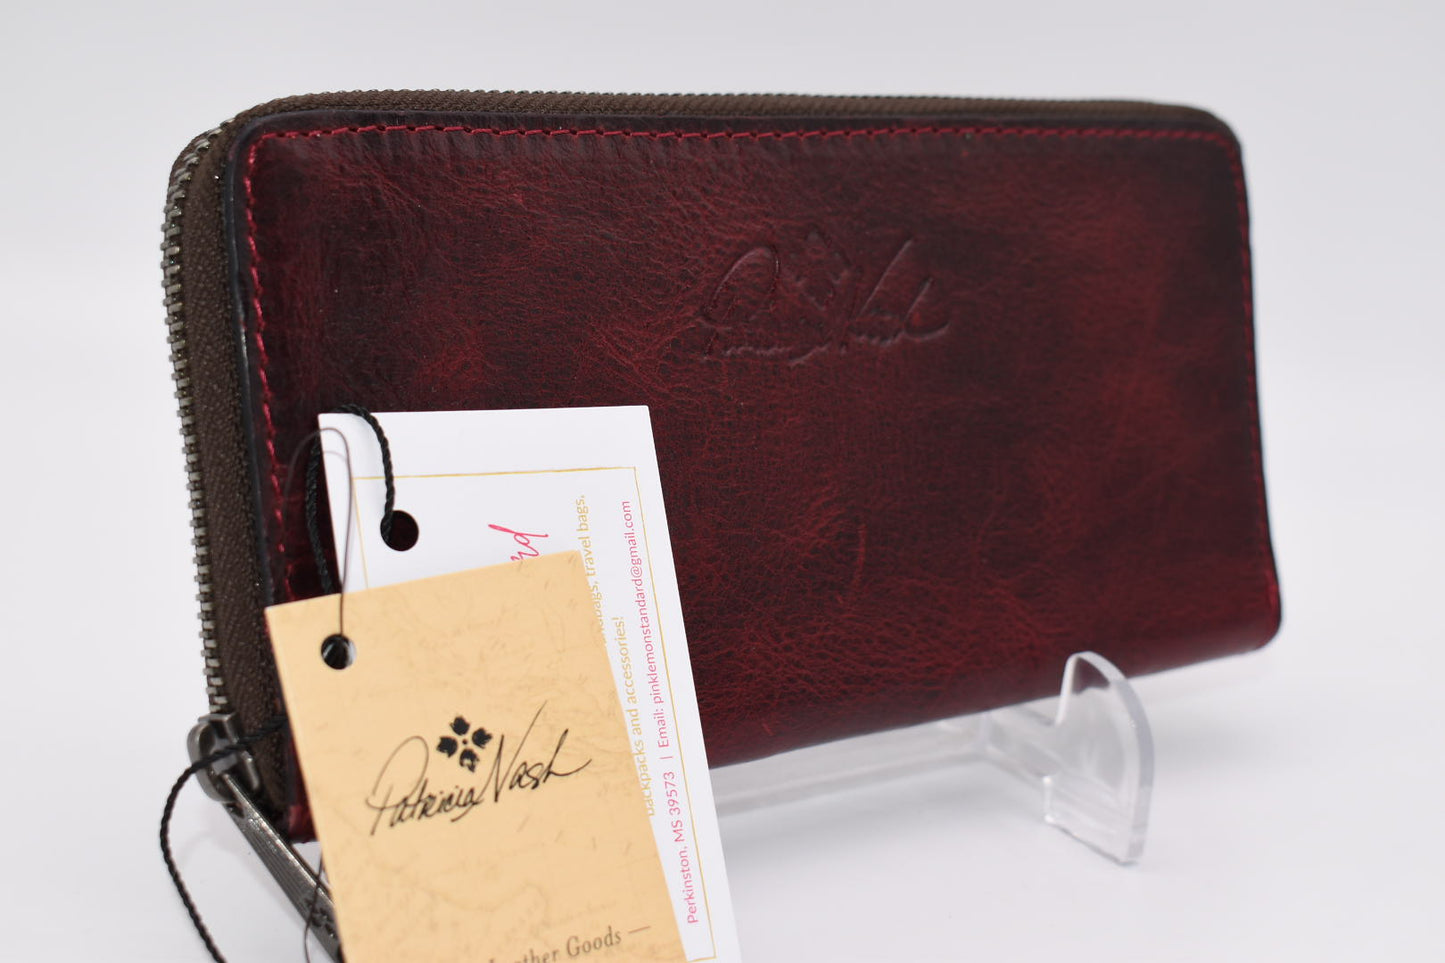 Patricia Nash Lauria Wallet in Distressed Leather Red